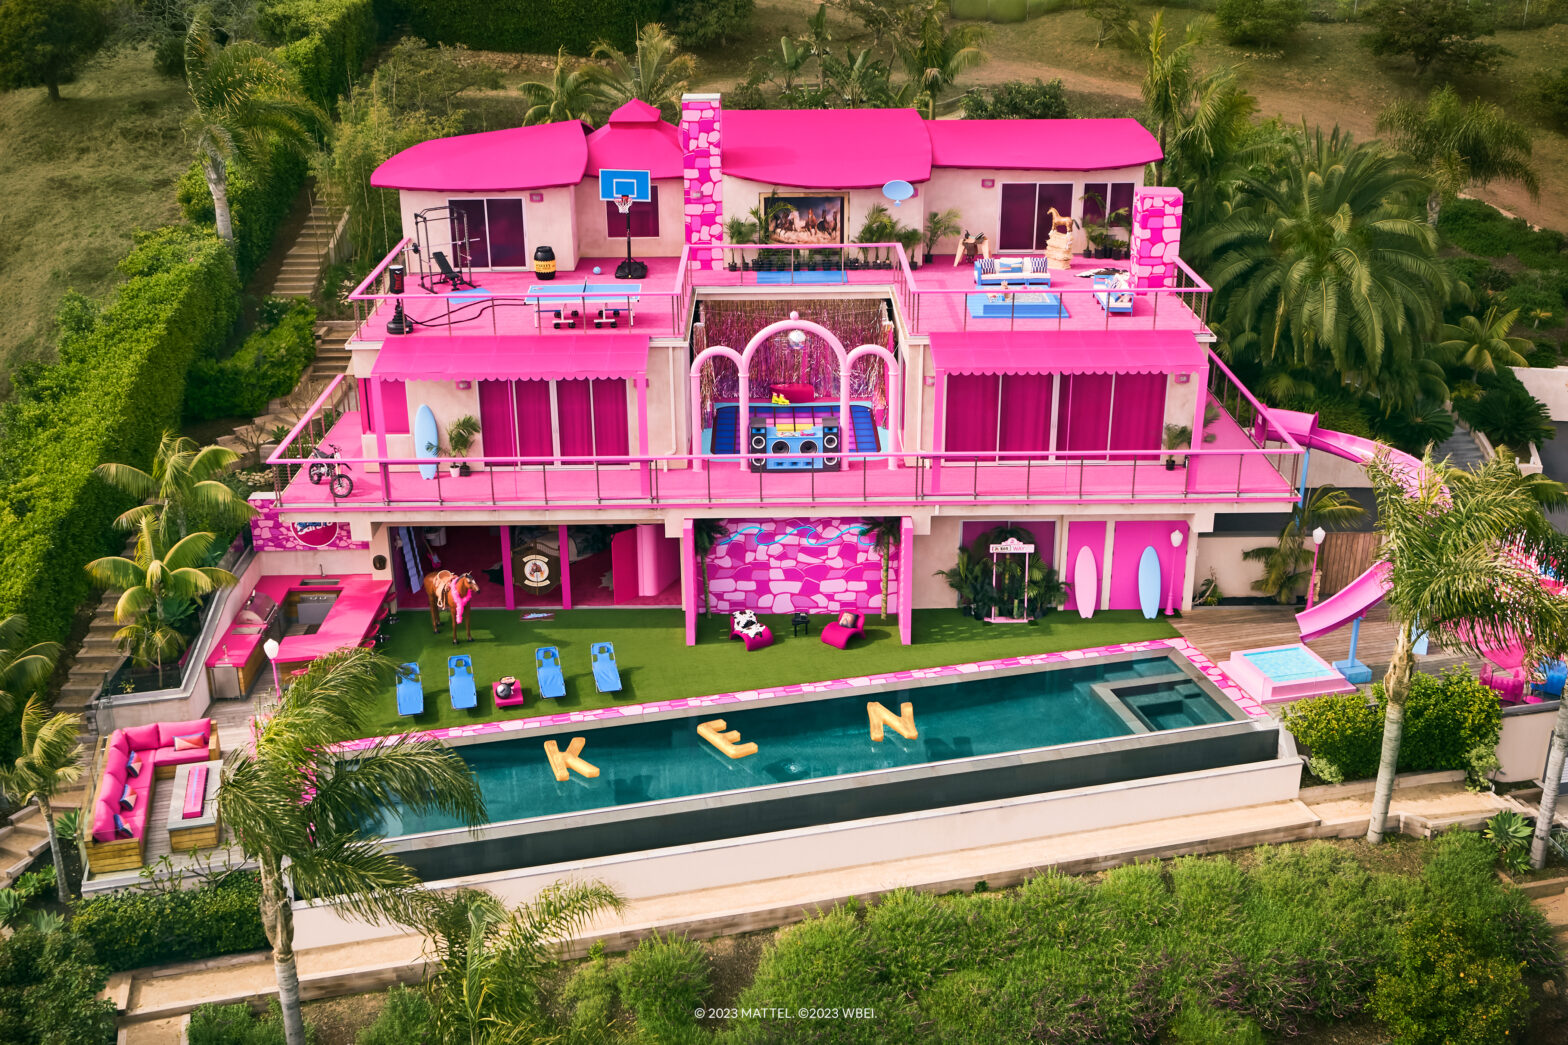 Stay At The Barbie Malibu Dreamhouse on Airbnb